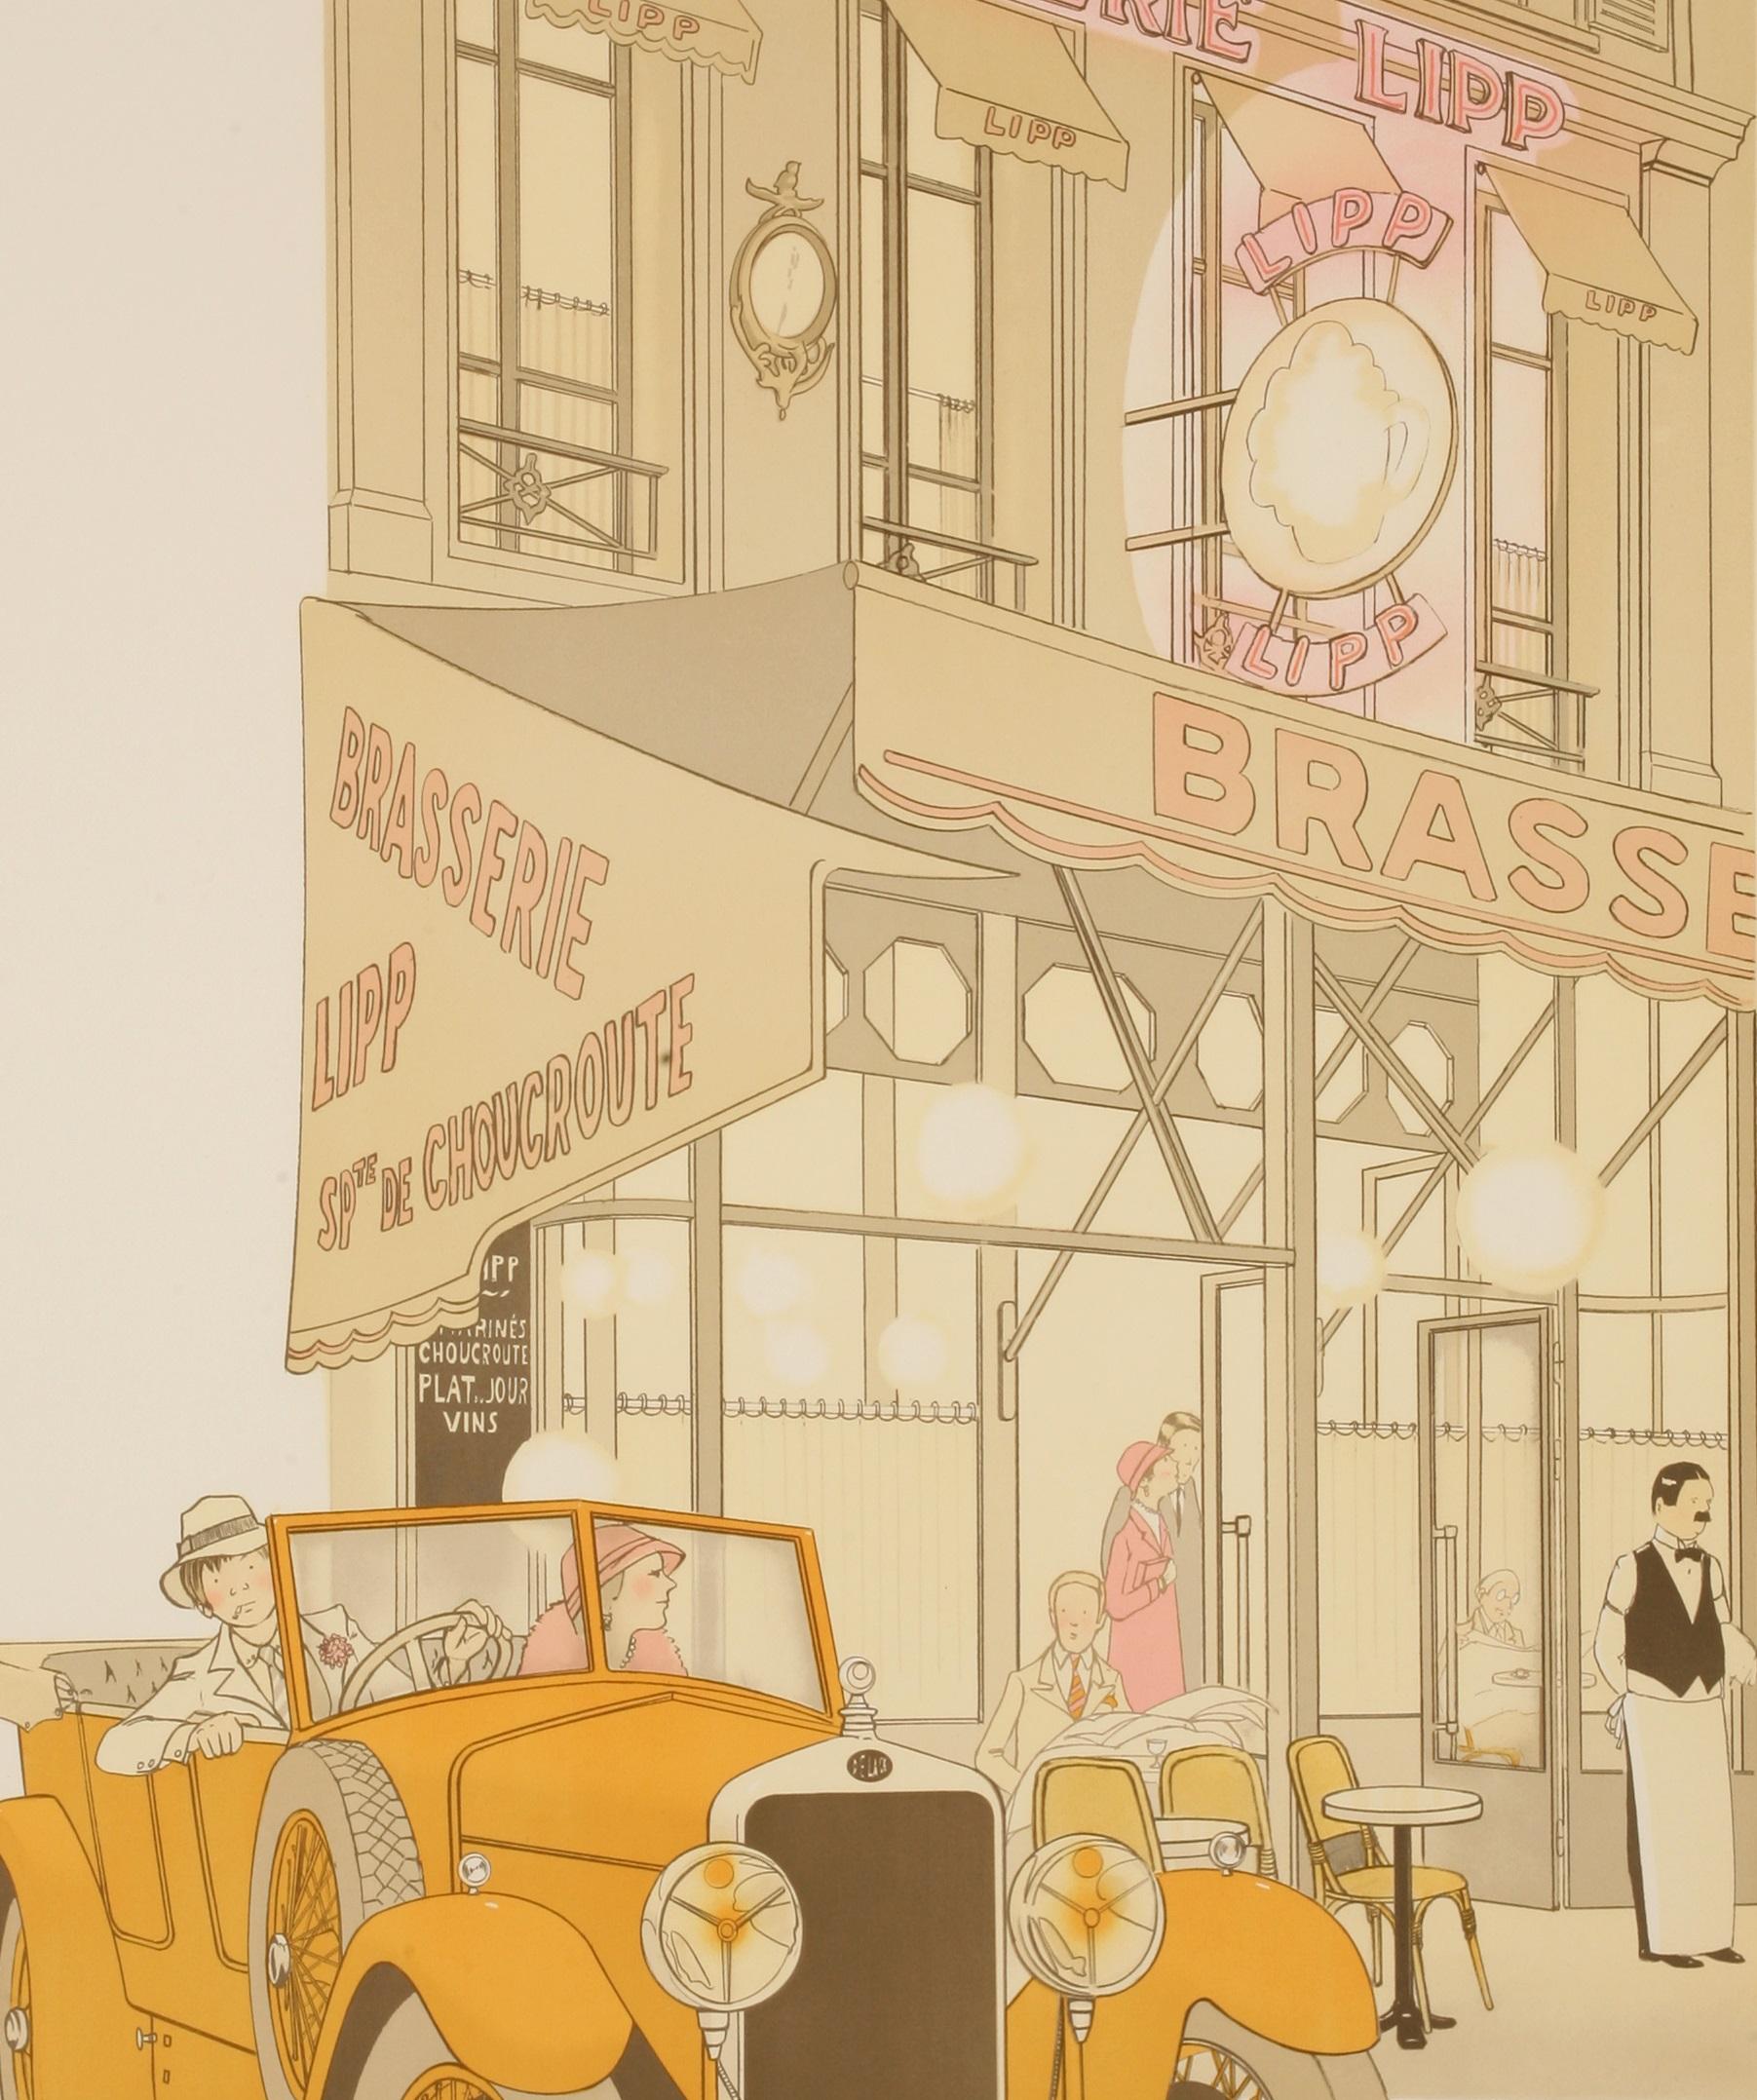 Original Print-Paul Noyer-Lipp Restaurant Paris-Delage Classique Car, c.1979

Lithograph, signed and numbered, part of a series called 